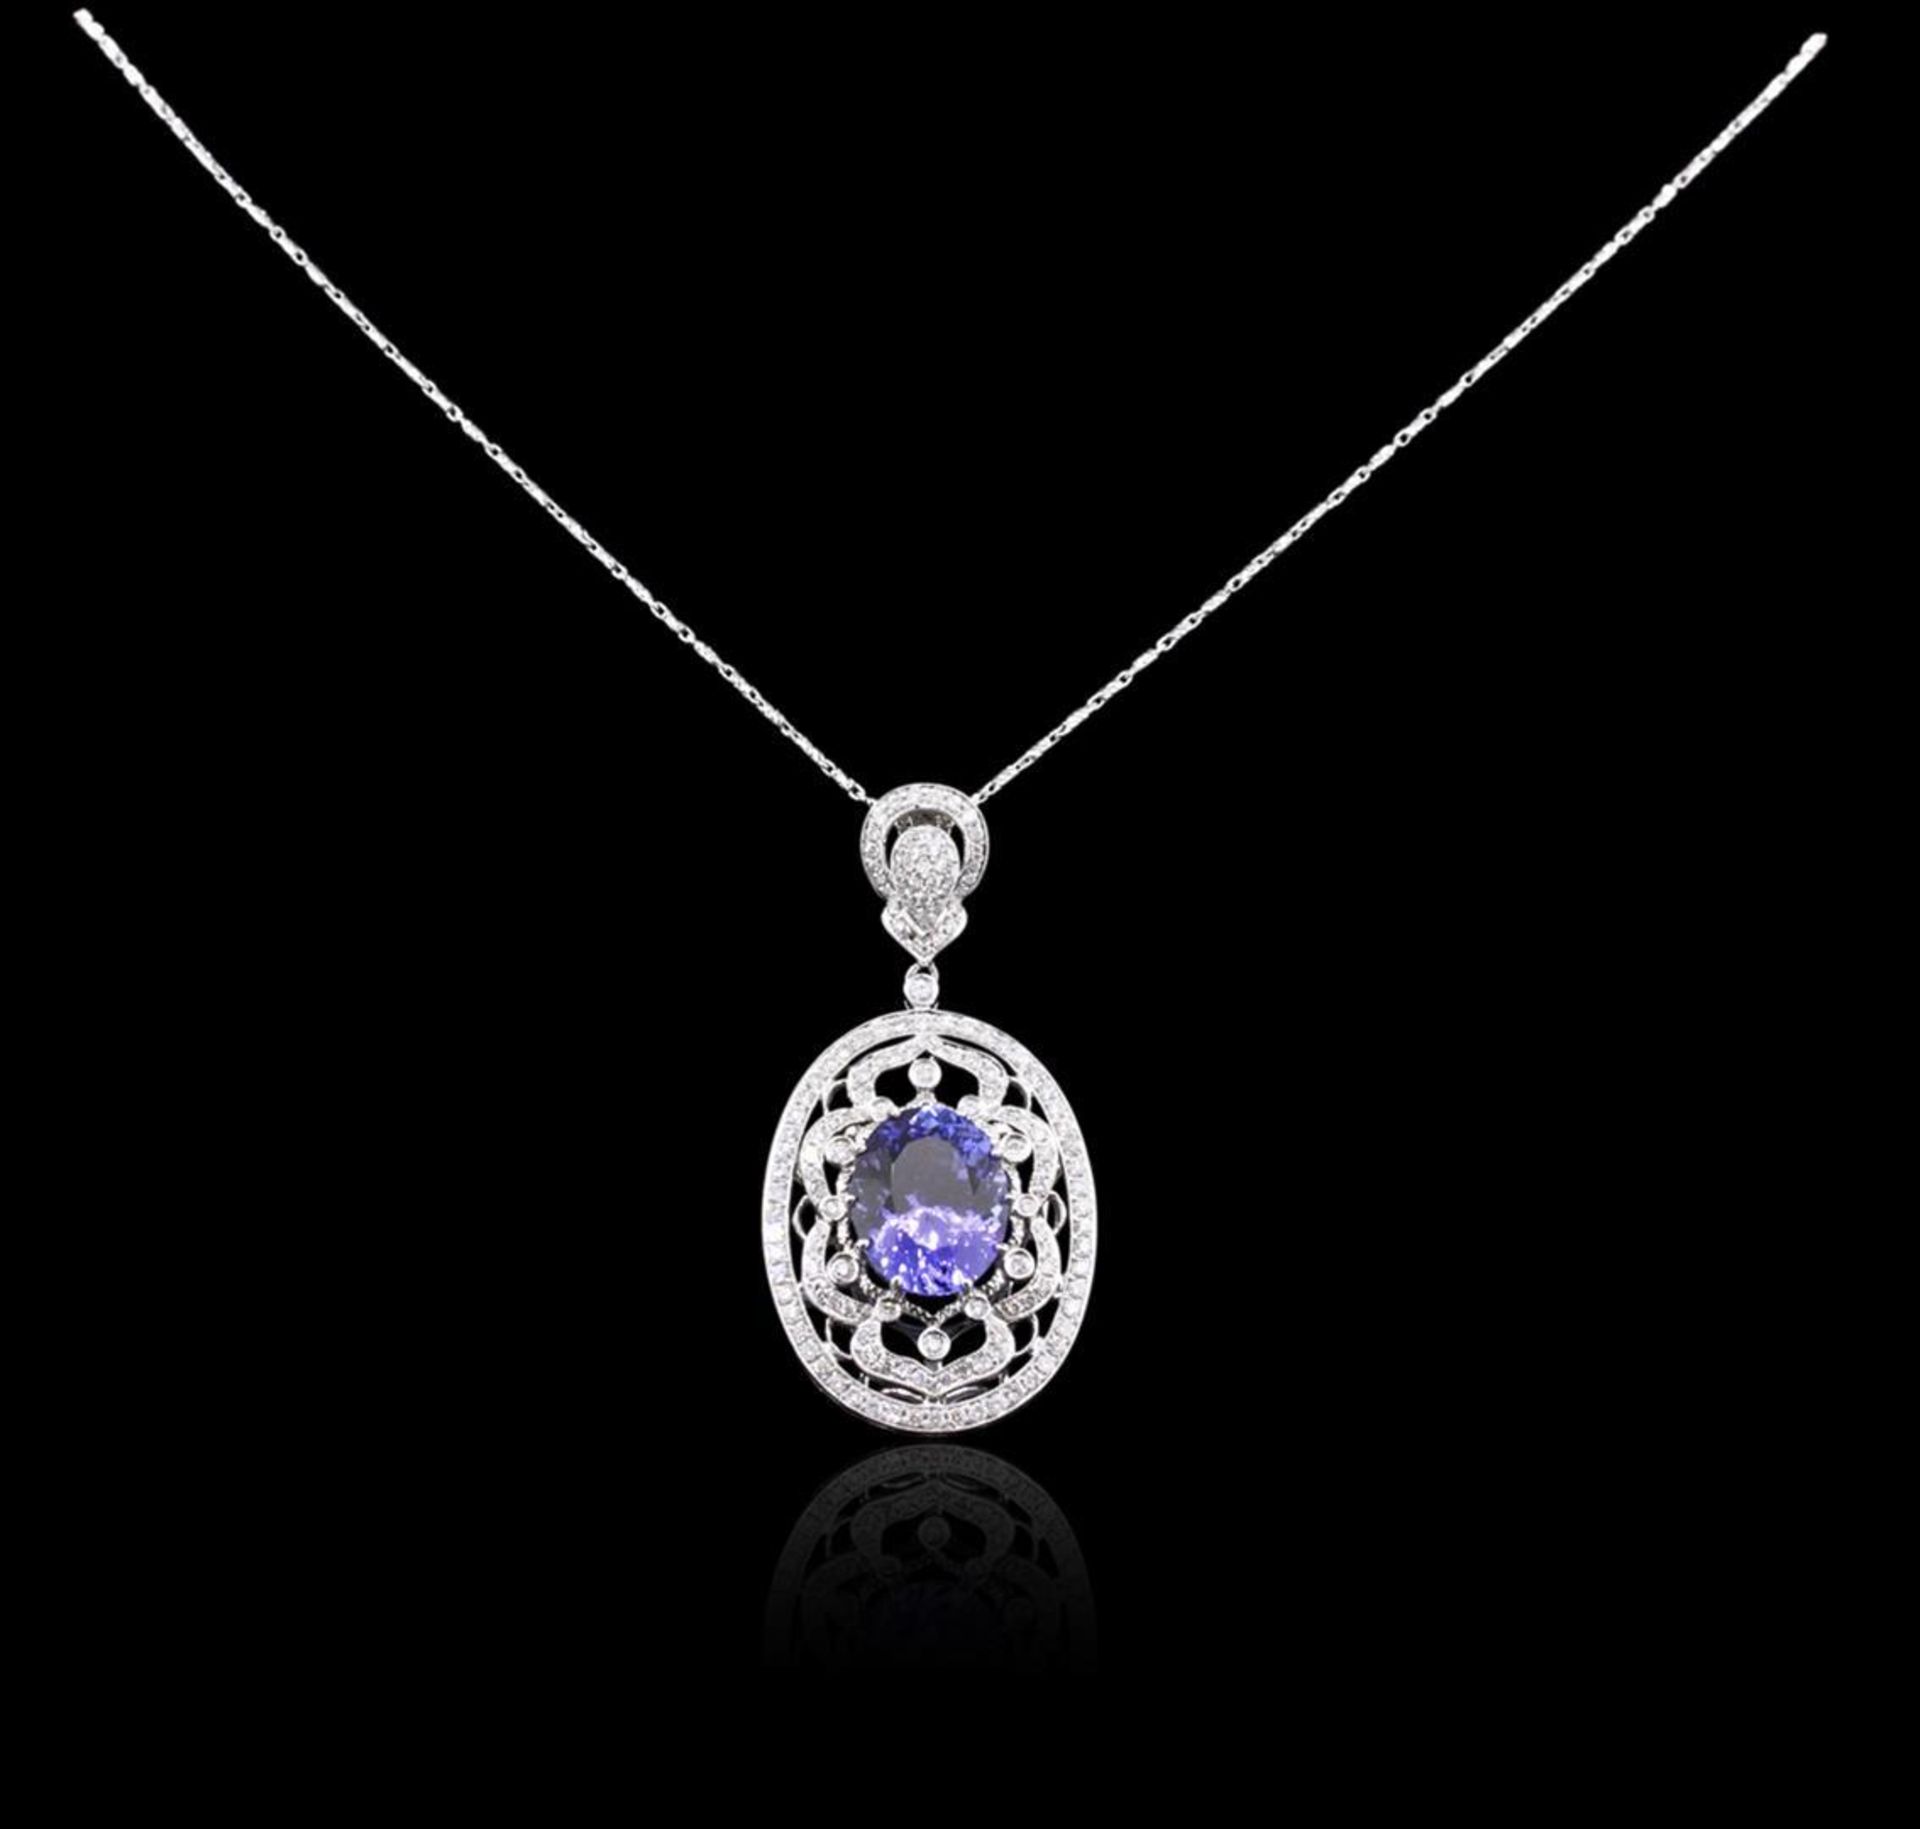 14KT White Gold 8.01 ctw Tanzanite and Diamond Pendant With Chain - Image 4 of 8